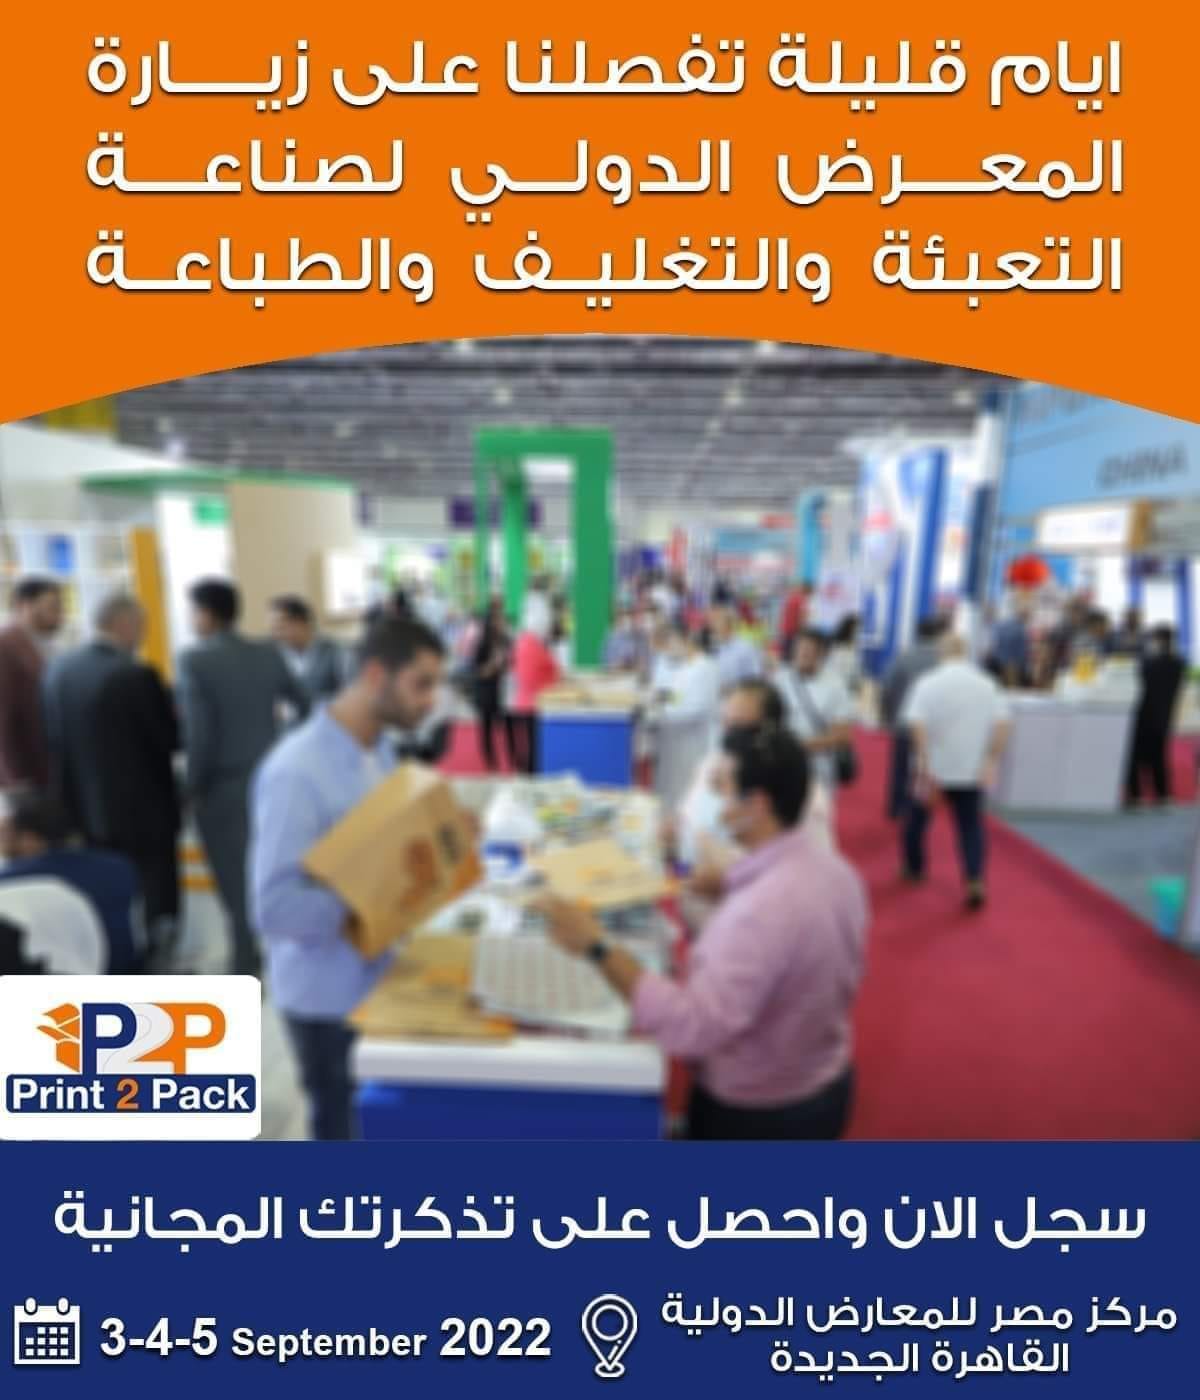 The 11th International Exhibition for the Packaging and Printing Industry